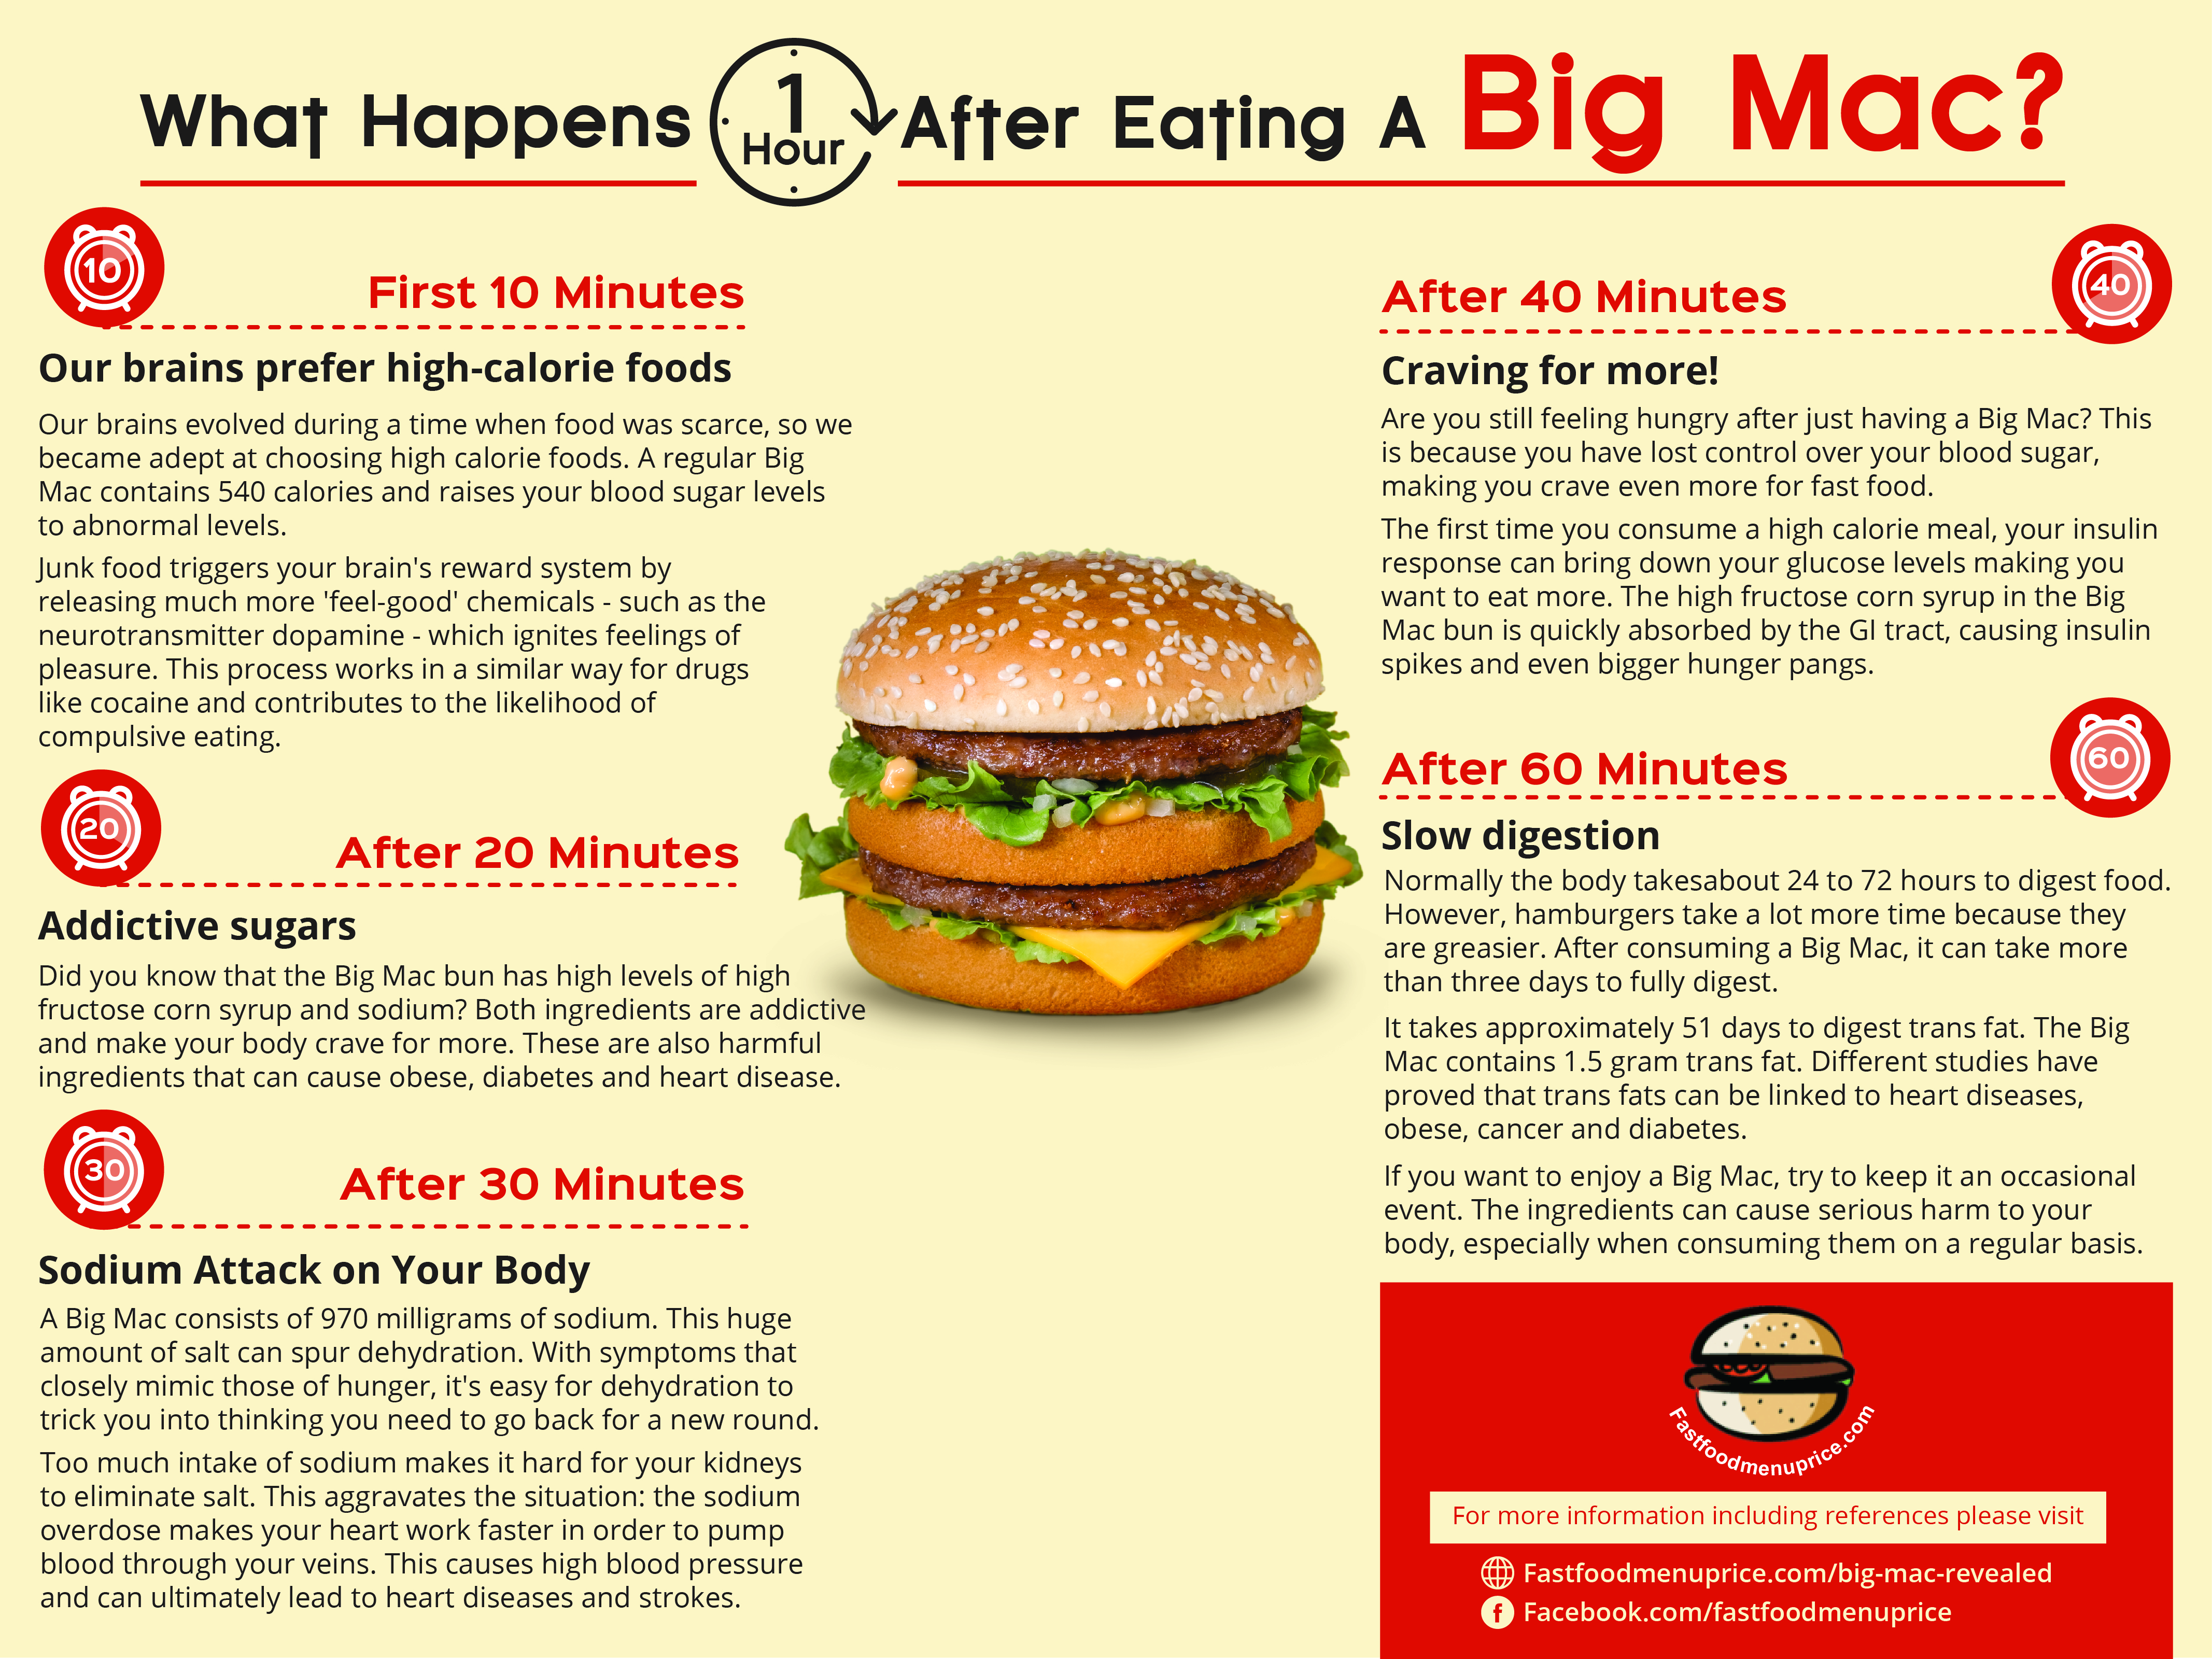 What Happens One Hour After Eating a Big Mac